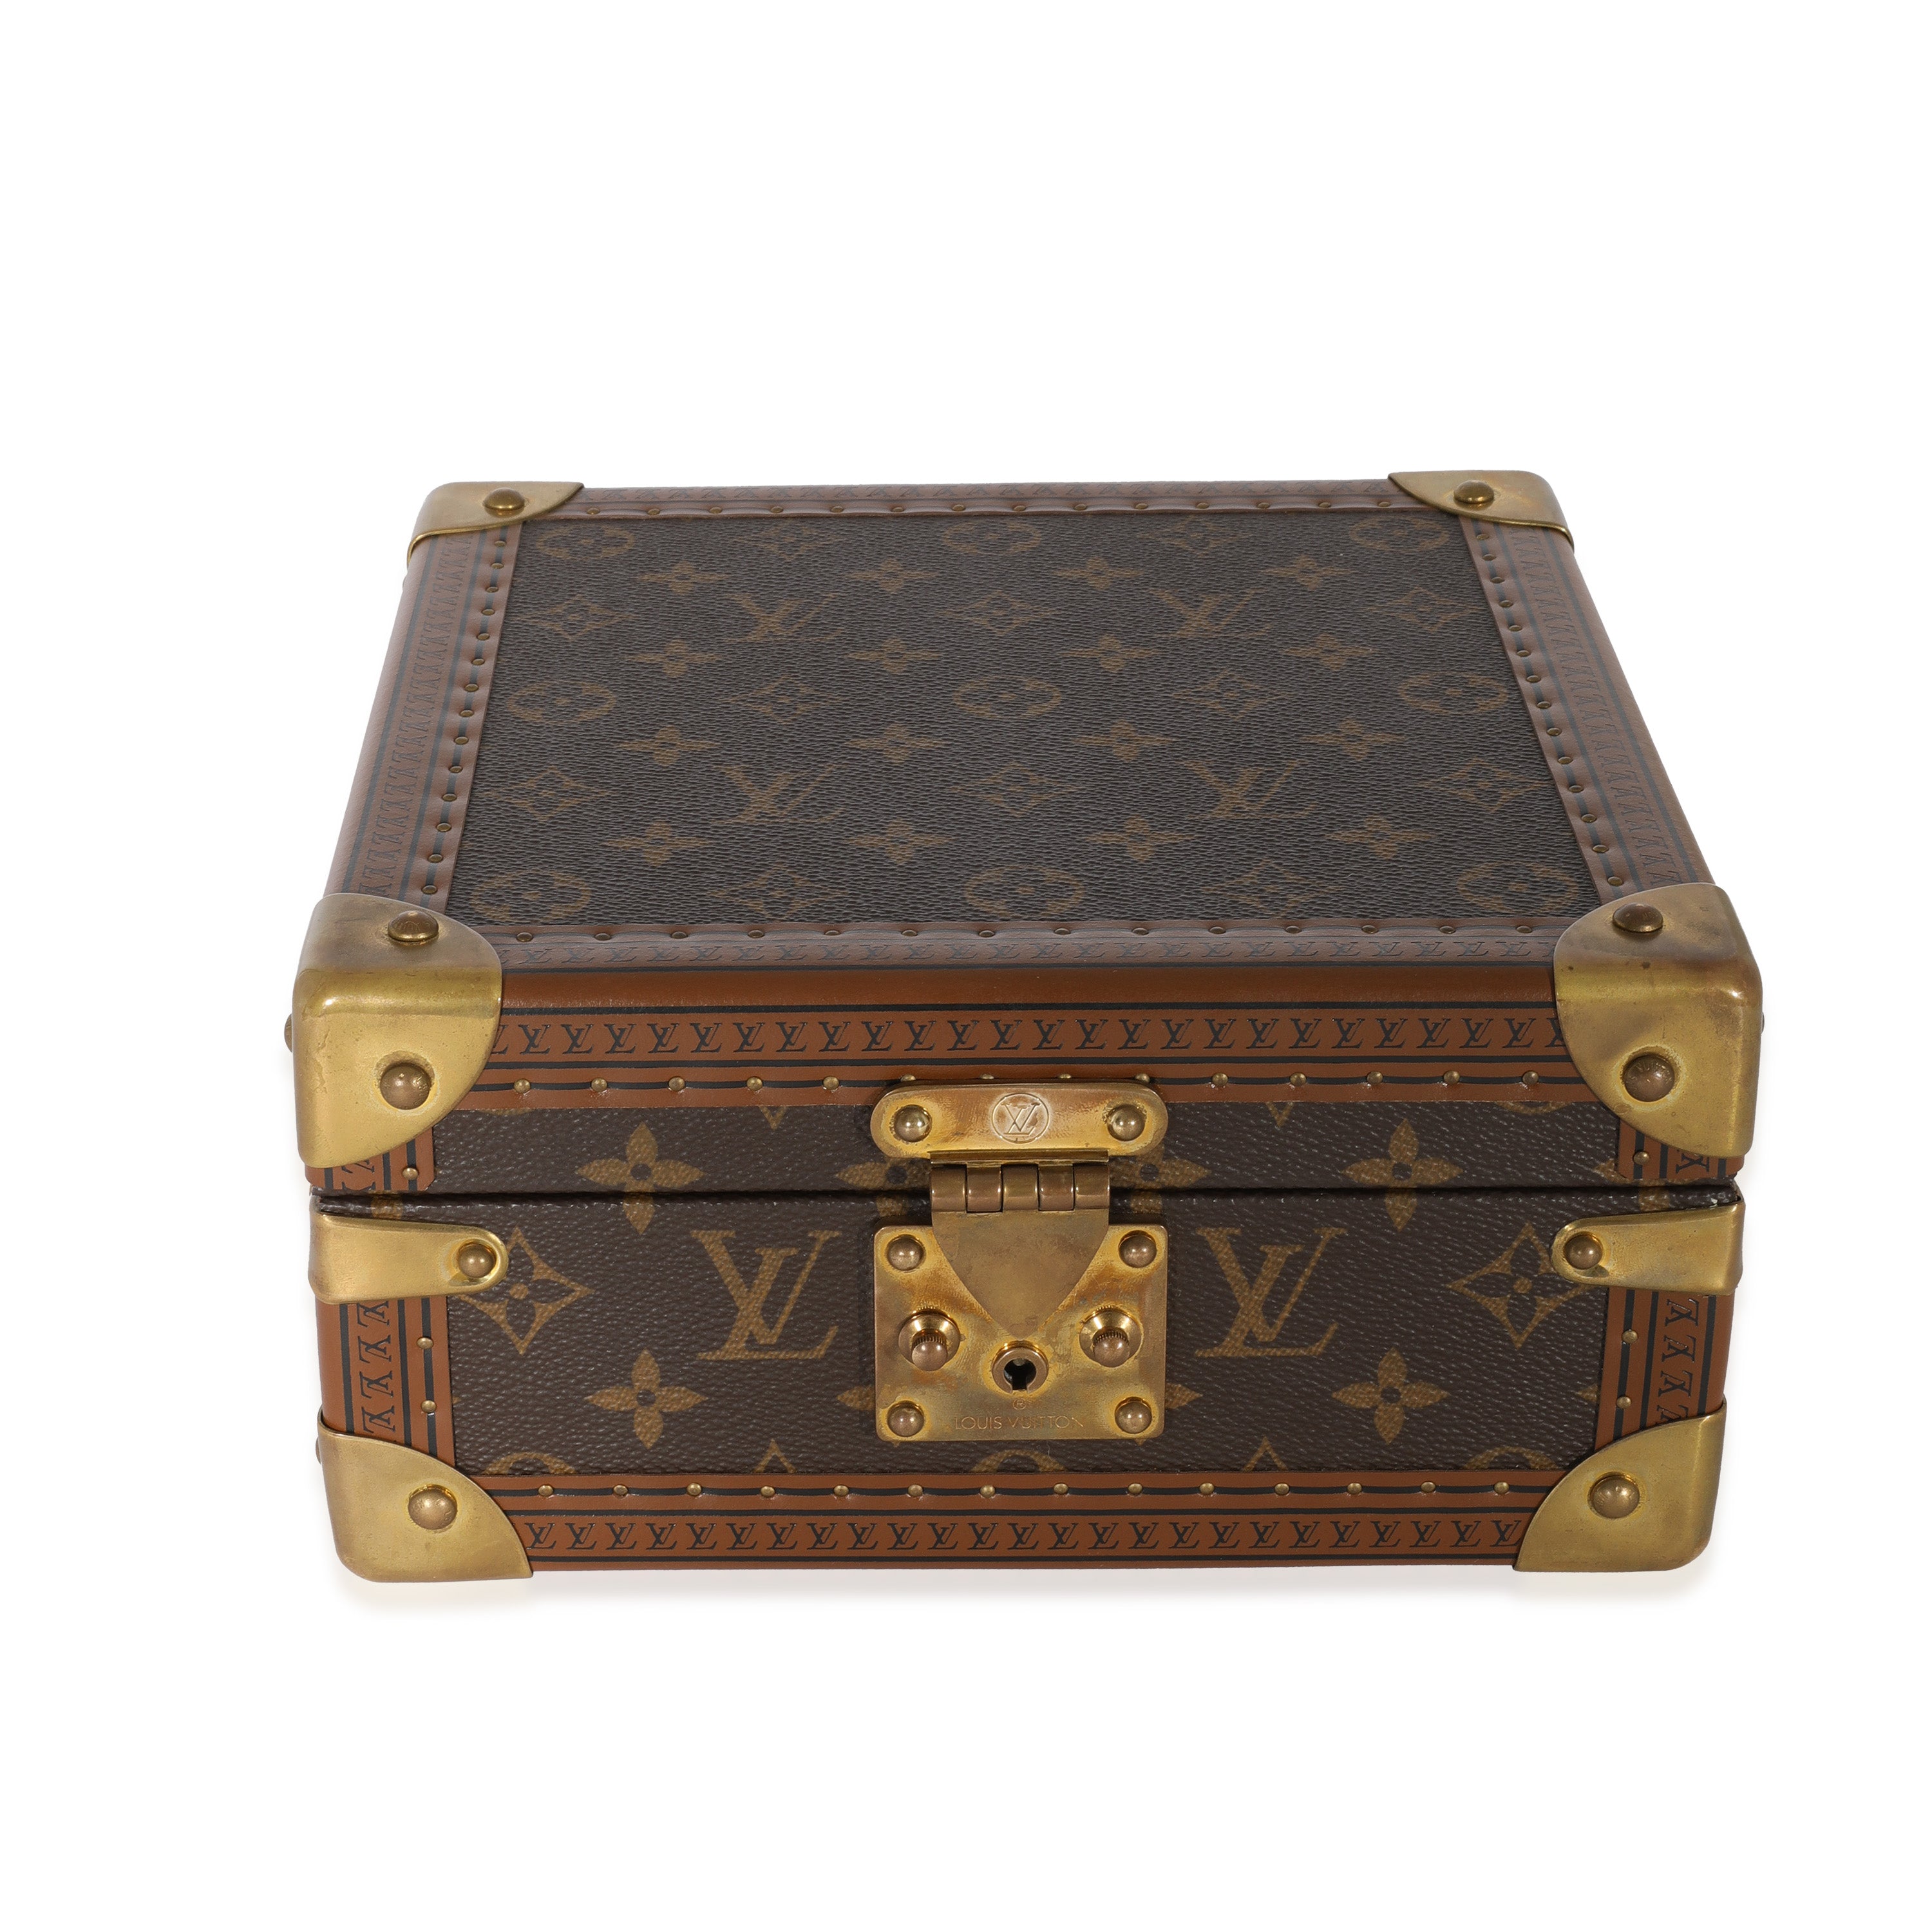 Antiques Atlas - Louis Vuitton, Hard-sided Luggage / Suitcase